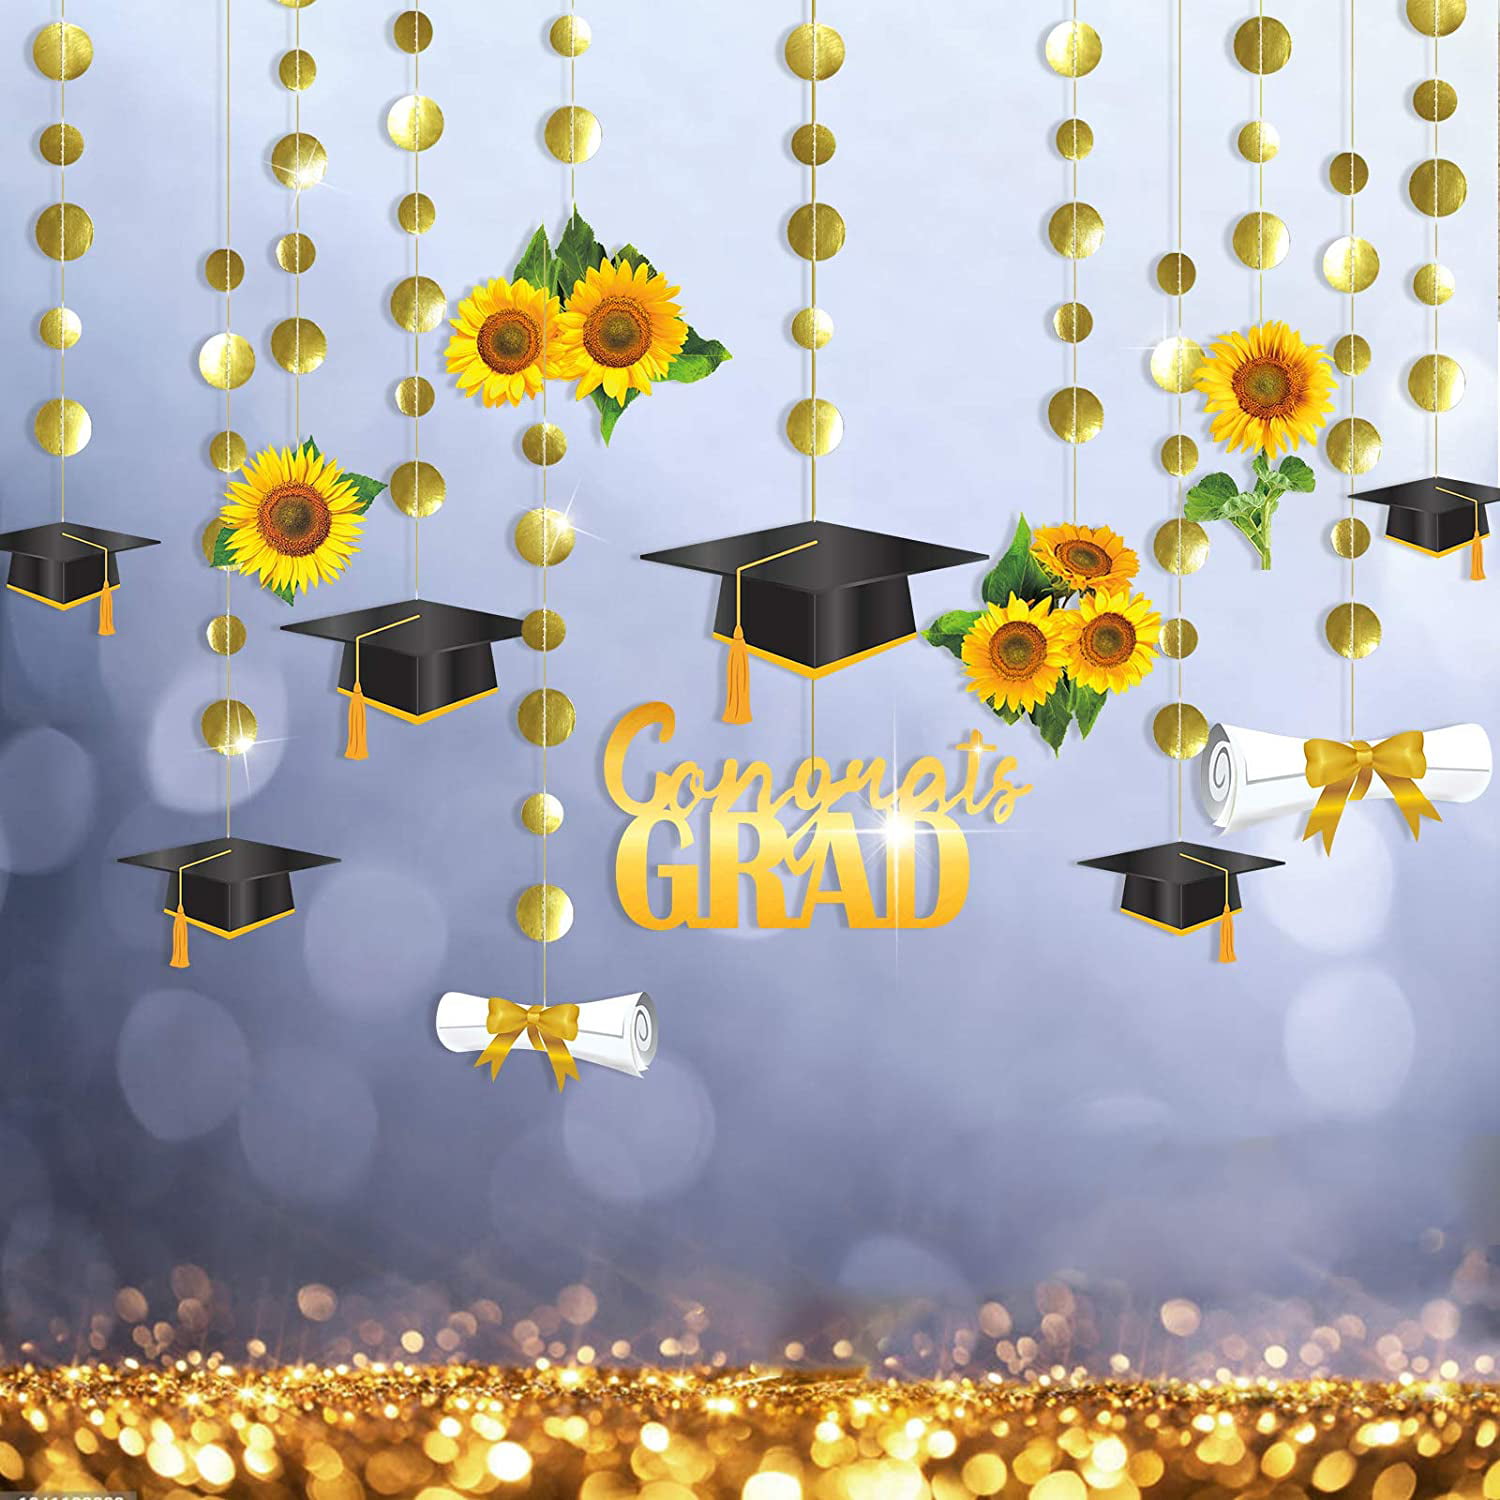 pinkblume Graduation Decorations 2021 Graduation Hat Diploma Star Garland Banner Bunting Streamer Backdrop for Graduation Party Supplies Classroom Middle High School Grad Home Decor Black and Gold 